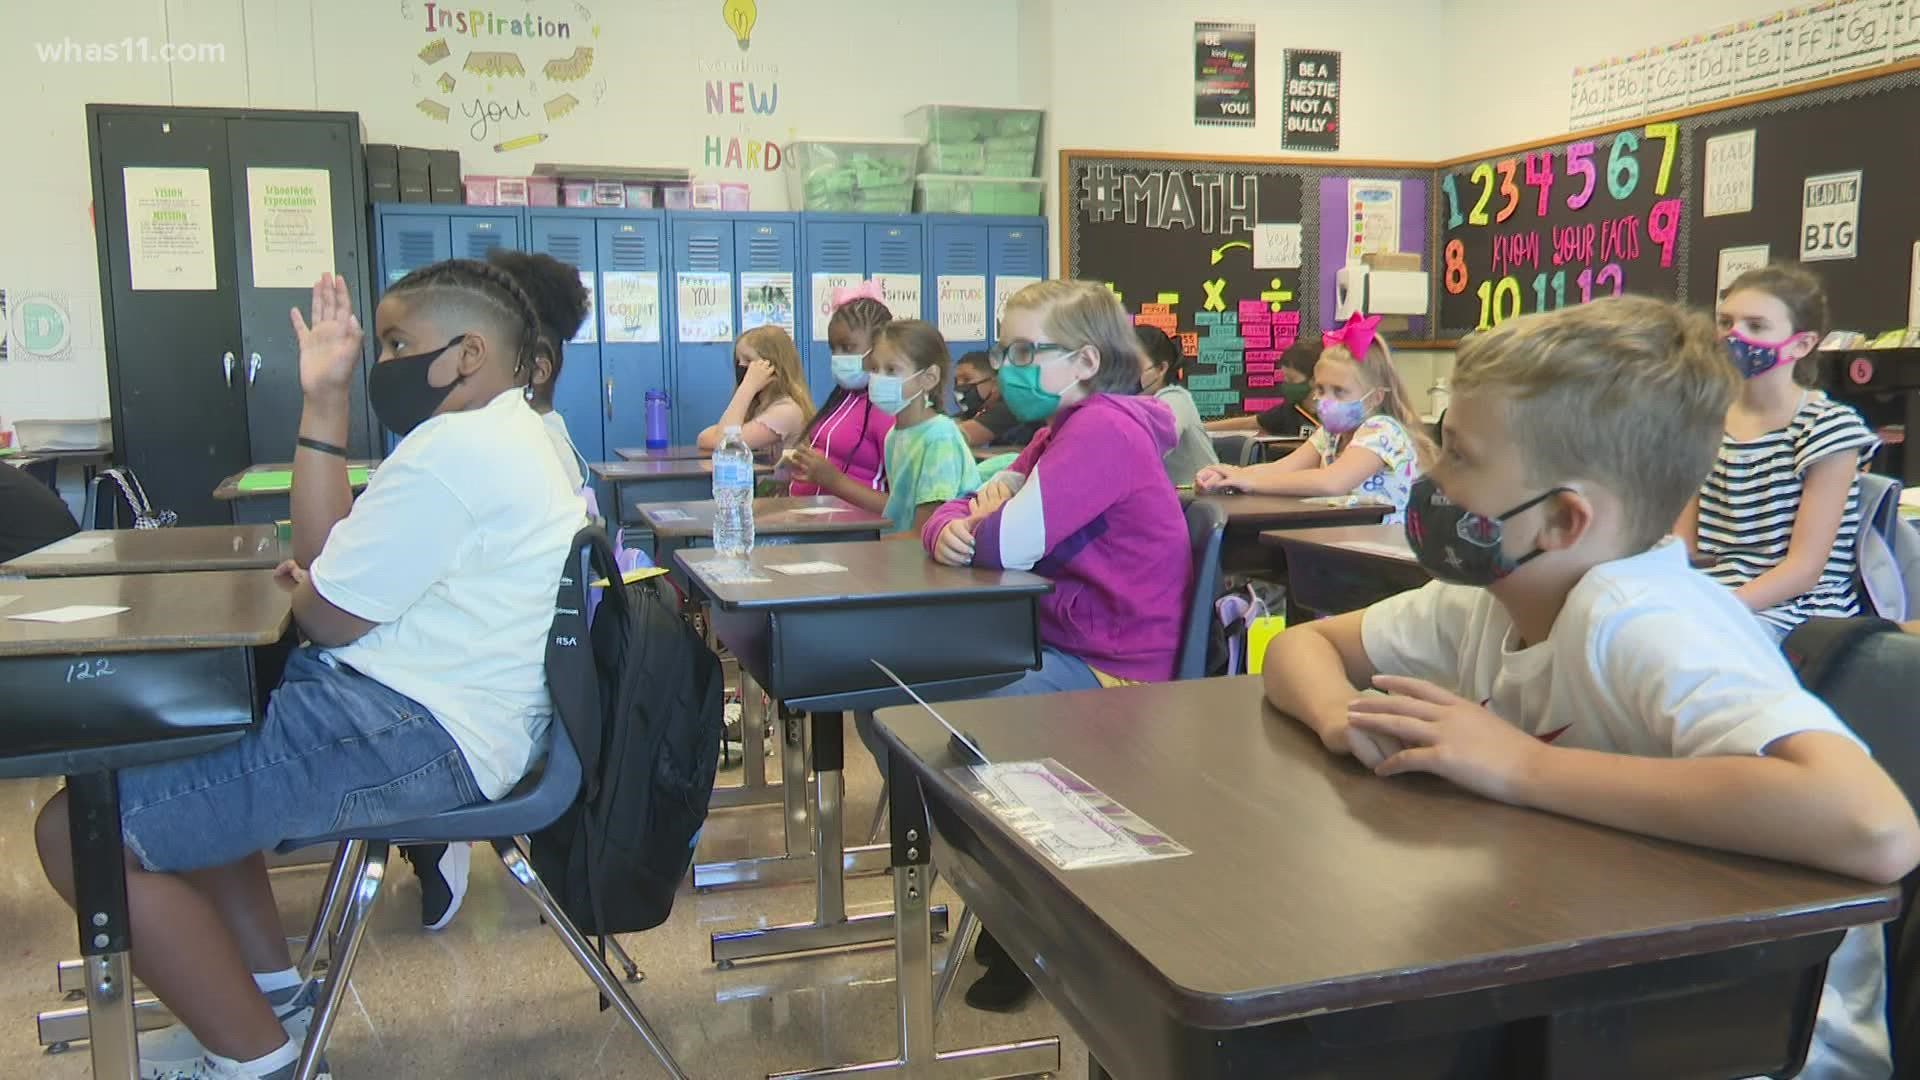 New outfits, new teachers, and school lunches are all signs of the first day of school. But this year, so are masks.